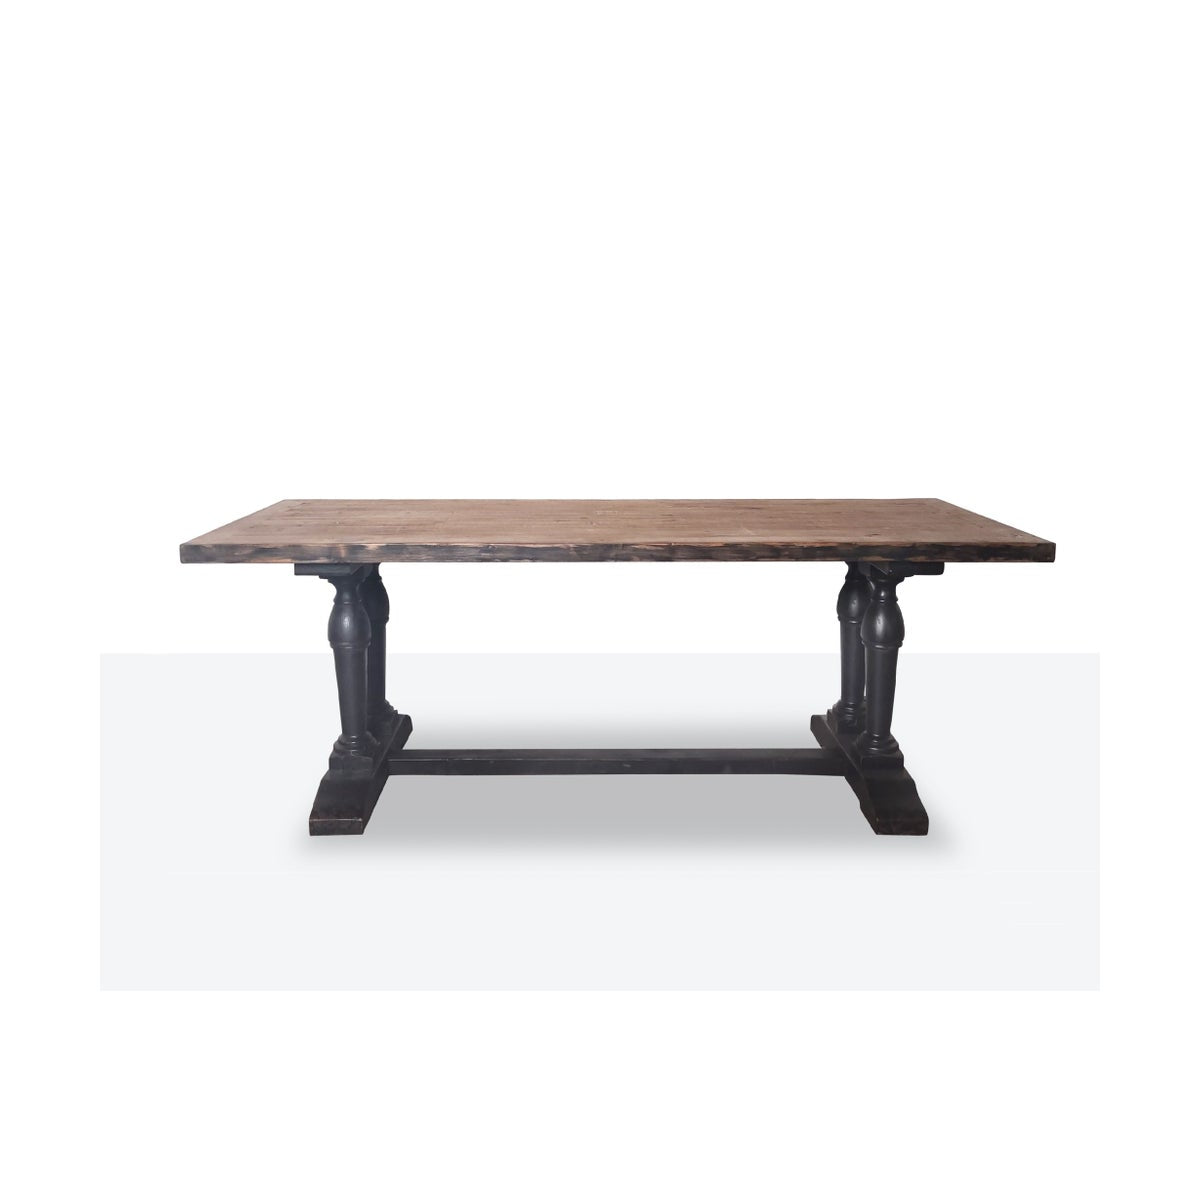 Old pine dining table black